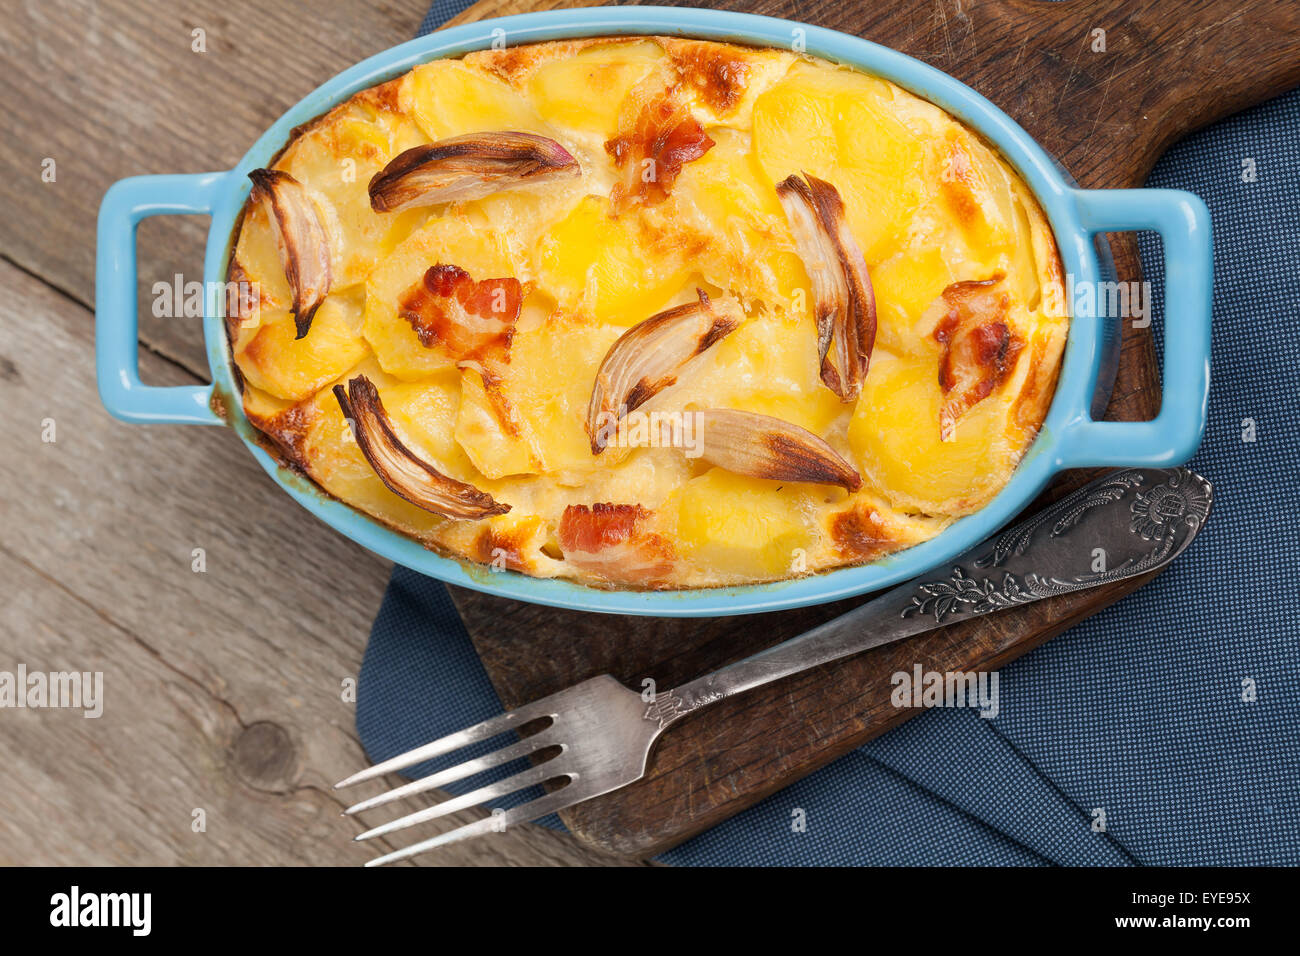 Potato casserole with bacon, parmesan cheese, onion and eggs. Stock Photo